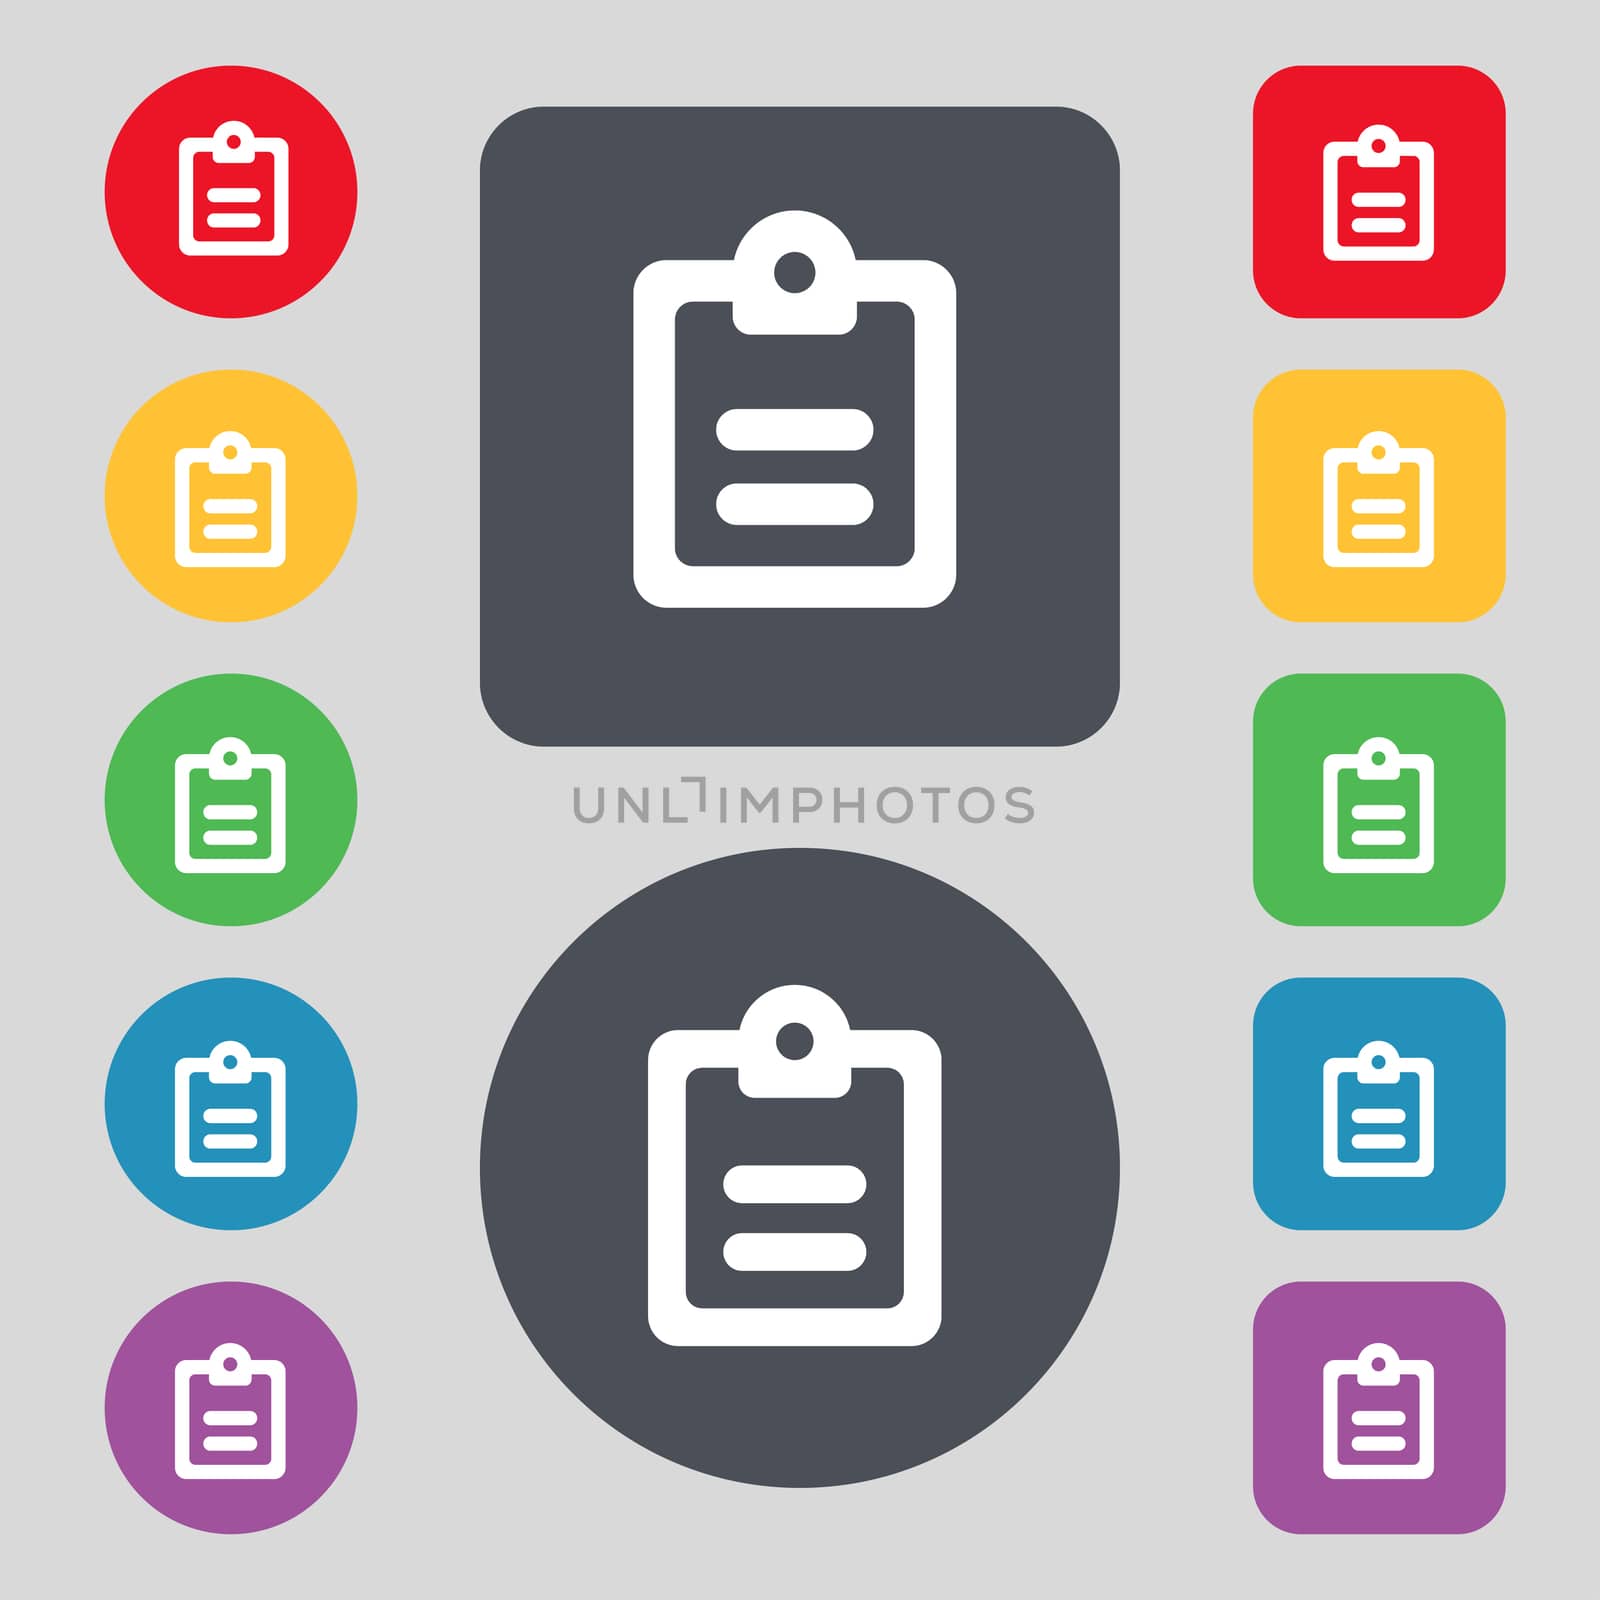 Text file icon sign. A set of 12 colored buttons. Flat design. illustration